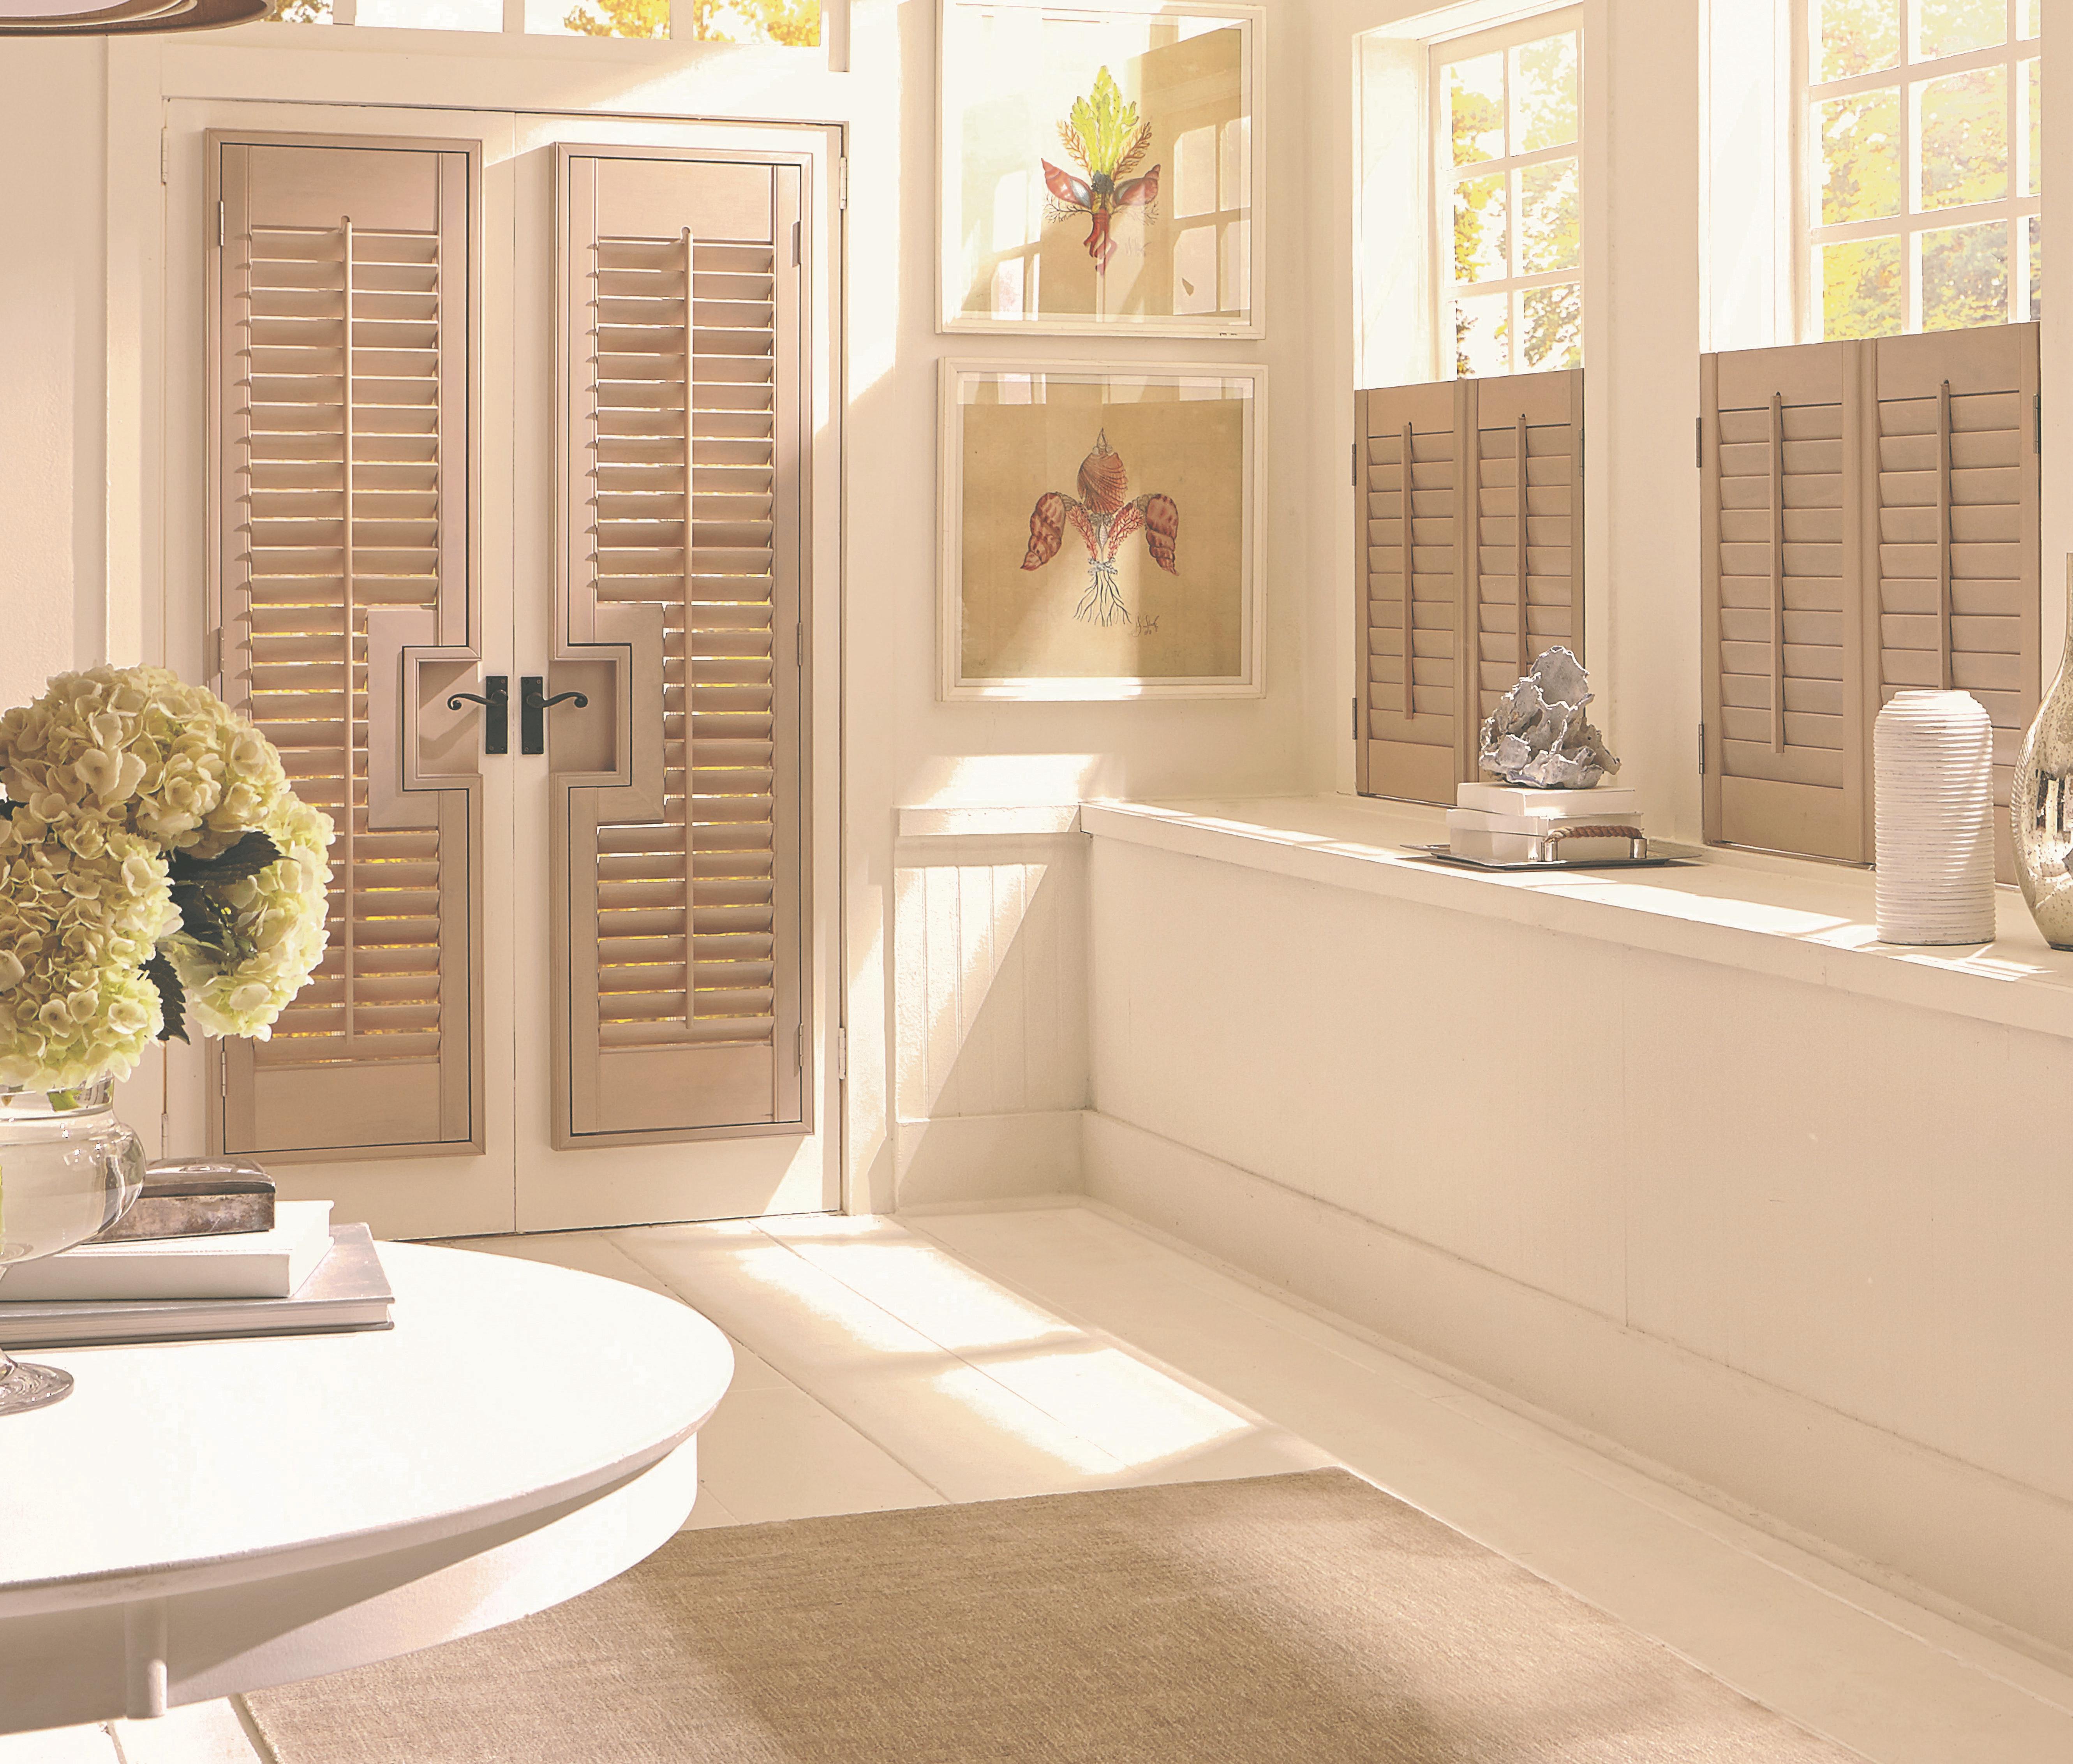 Wood Café Shutters are a beautiful way to make an area bright but still give you privacy. These are  Budget Blinds of Kitchener & Guelph Guelph (519)341-4561